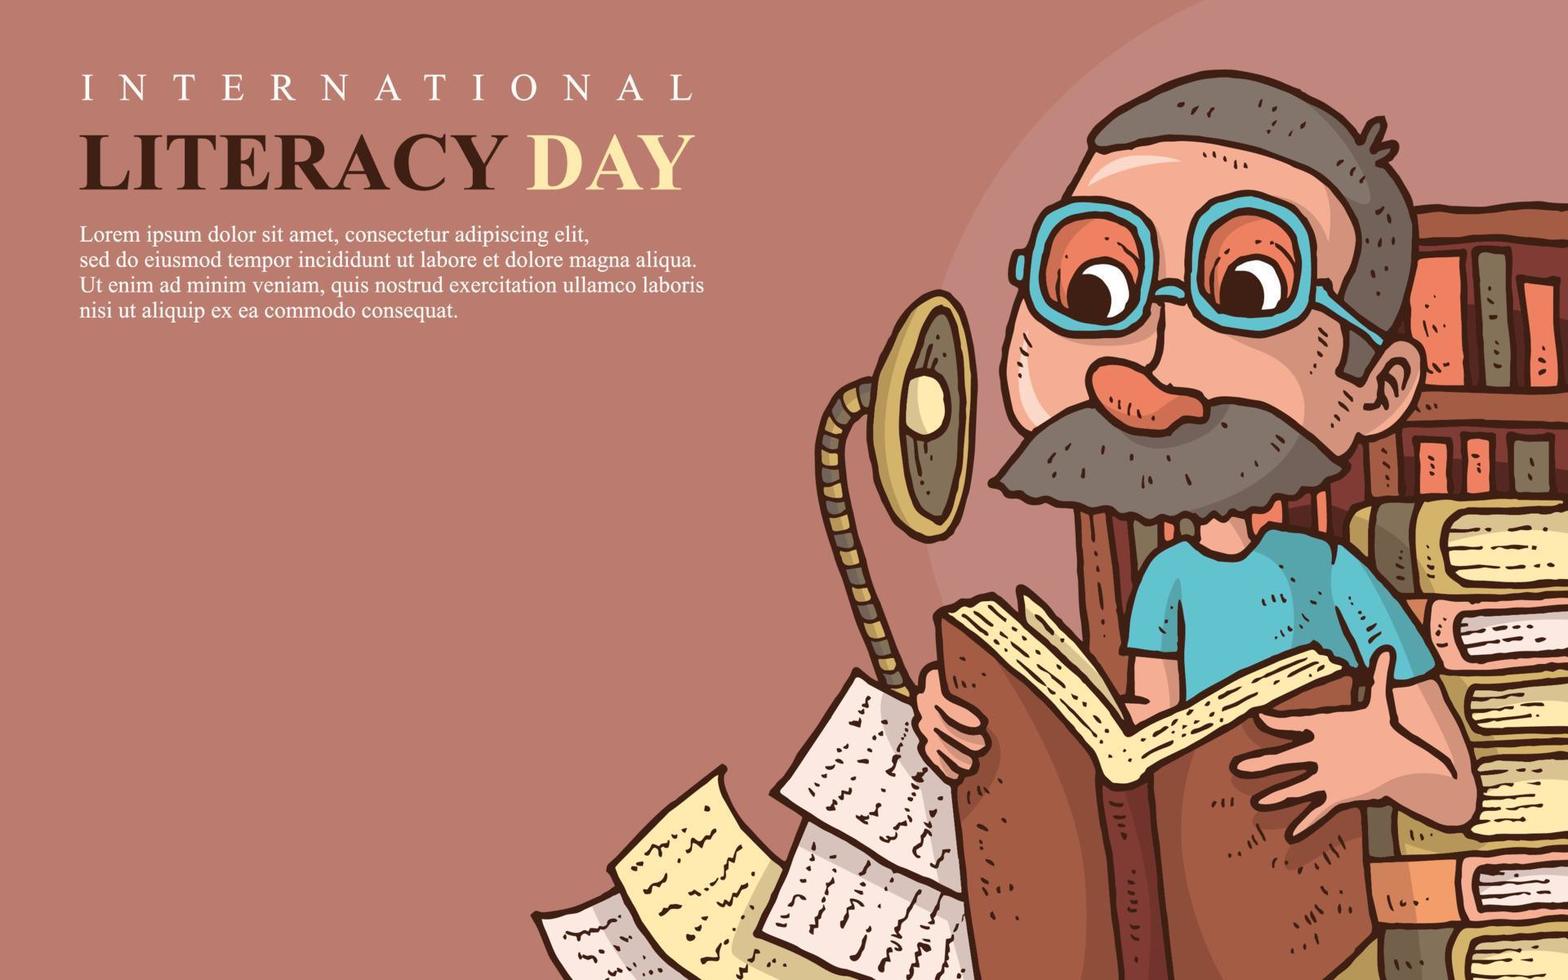 International literacy day banner with old men reading book illustration vector